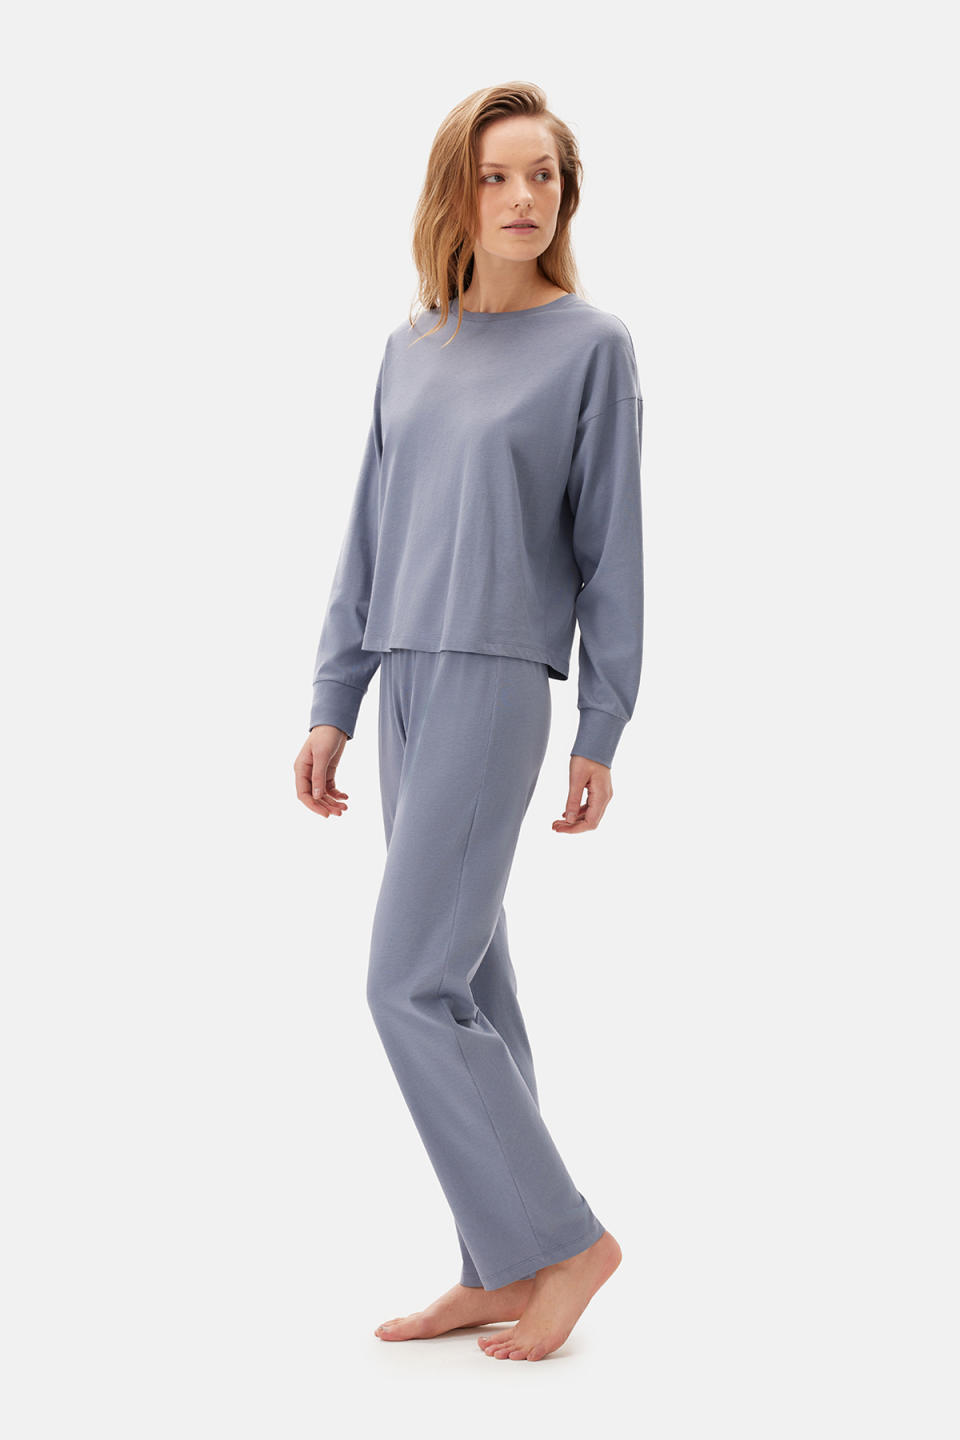 Material science company Hologenix has teamed with Turkish underwear apparel brand Dagi to introduce eco-friendly sleep sets utilizing Hologenix’s Celliant Viscose, the first in-fiber sustainable viscose infrared solution promoting better sleep. 